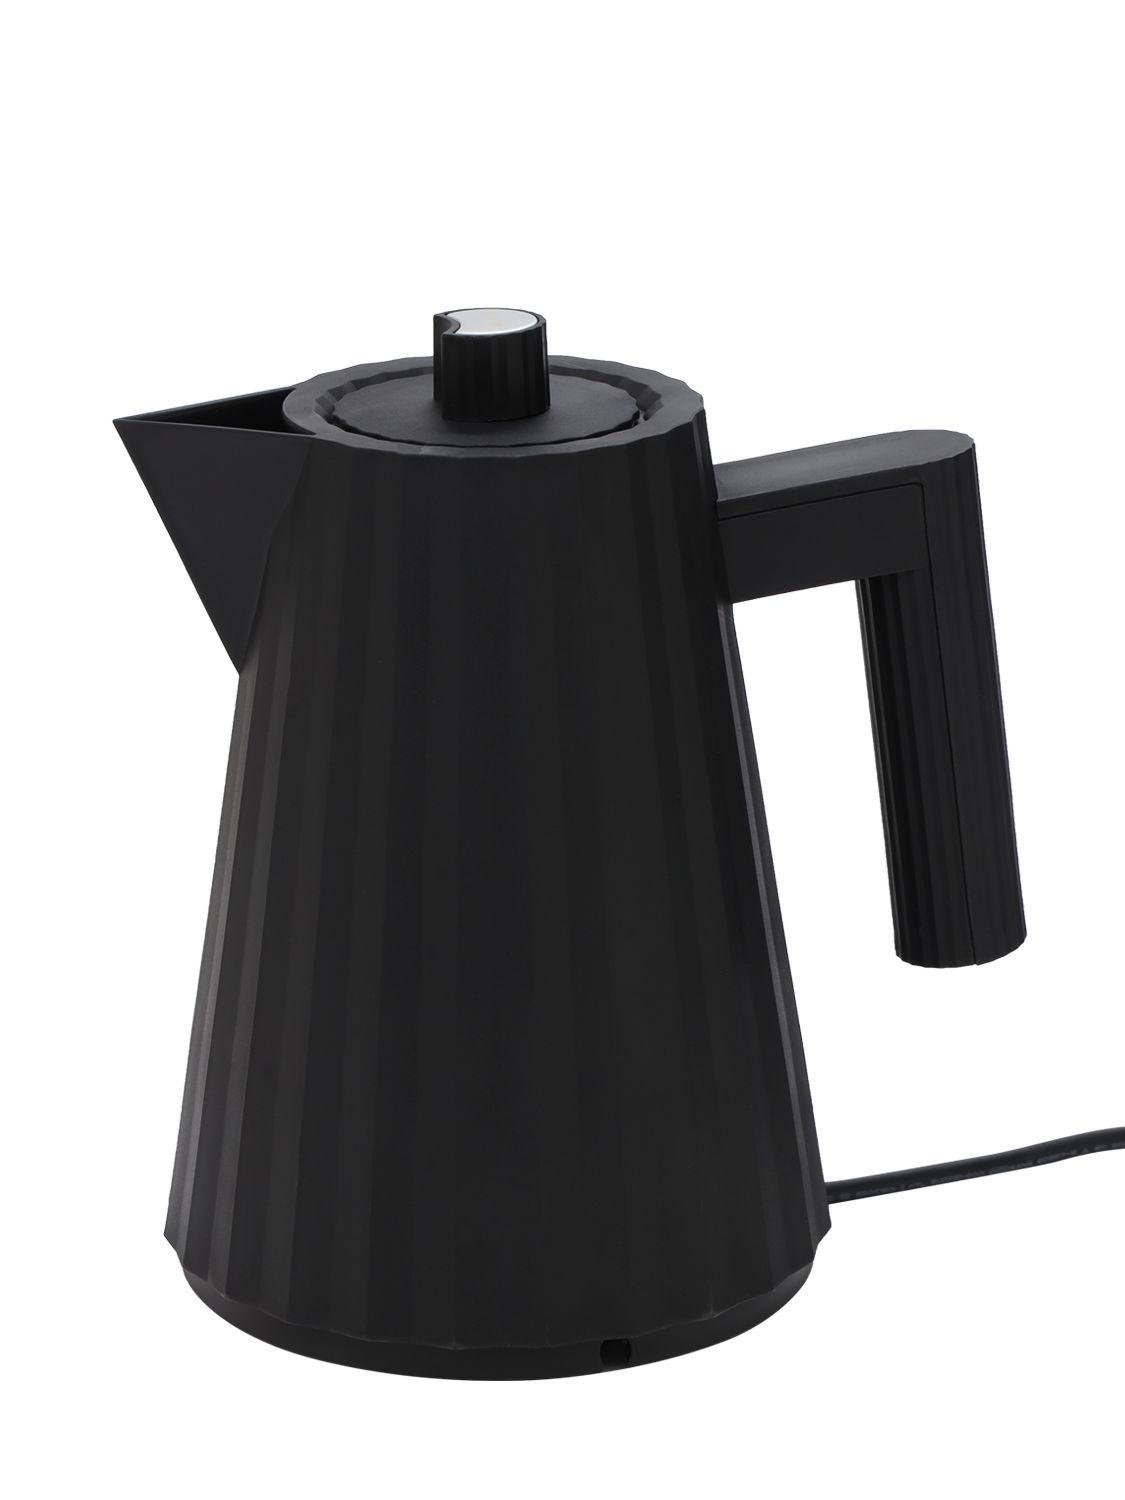 Plissé Small Electric Tea Kettle by ALESSI